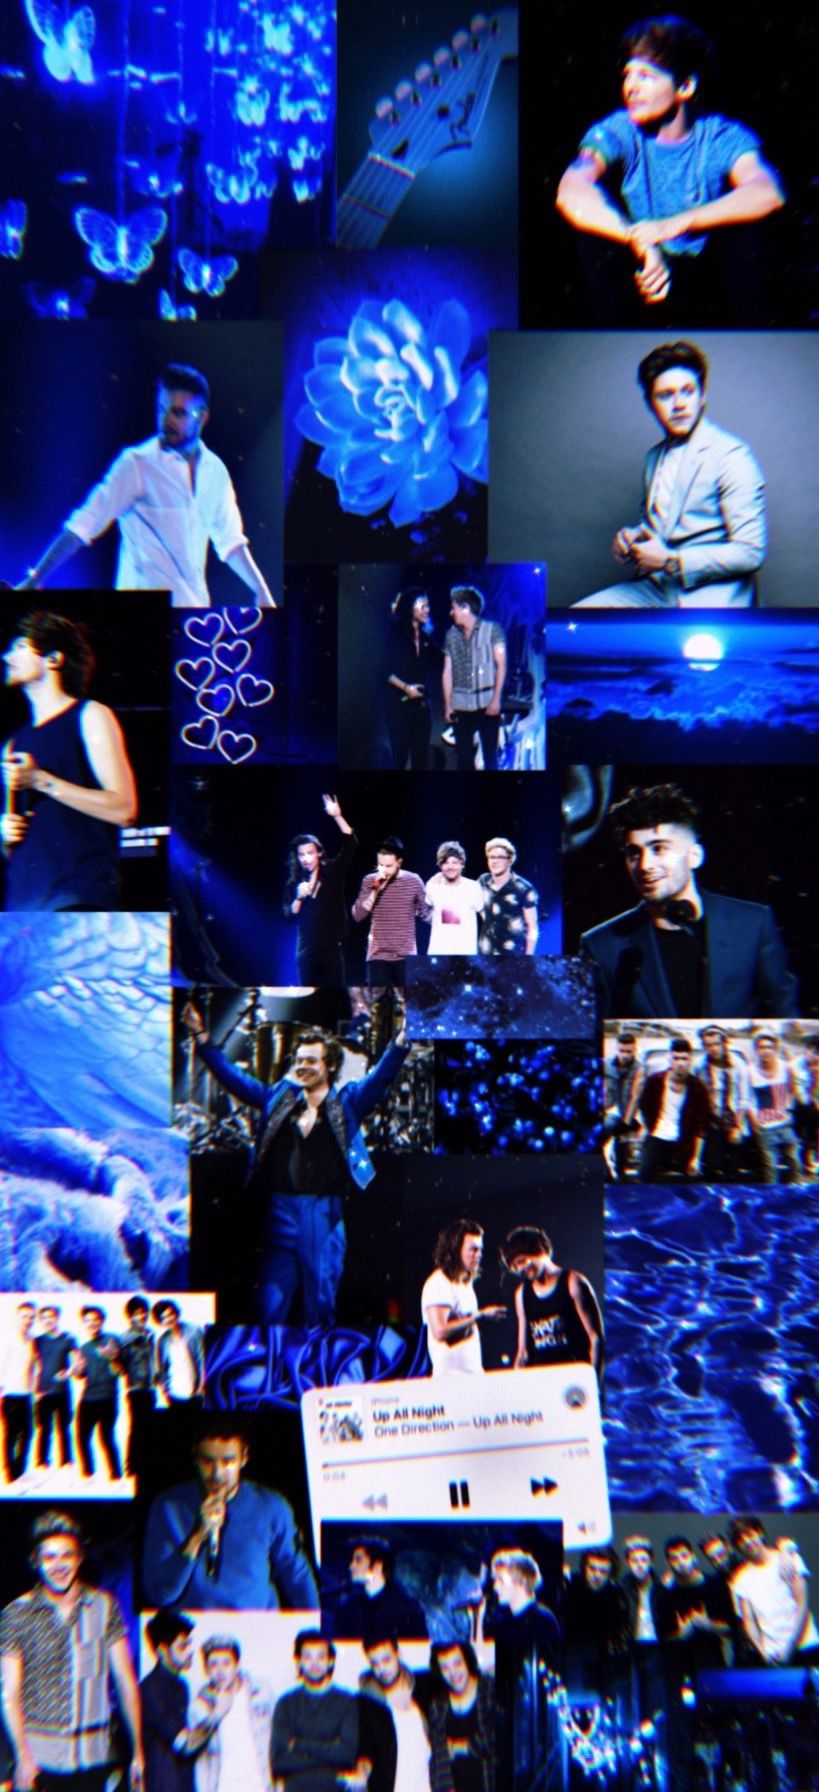 A collage of pictures with blue backgrounds - VSCO, One Direction